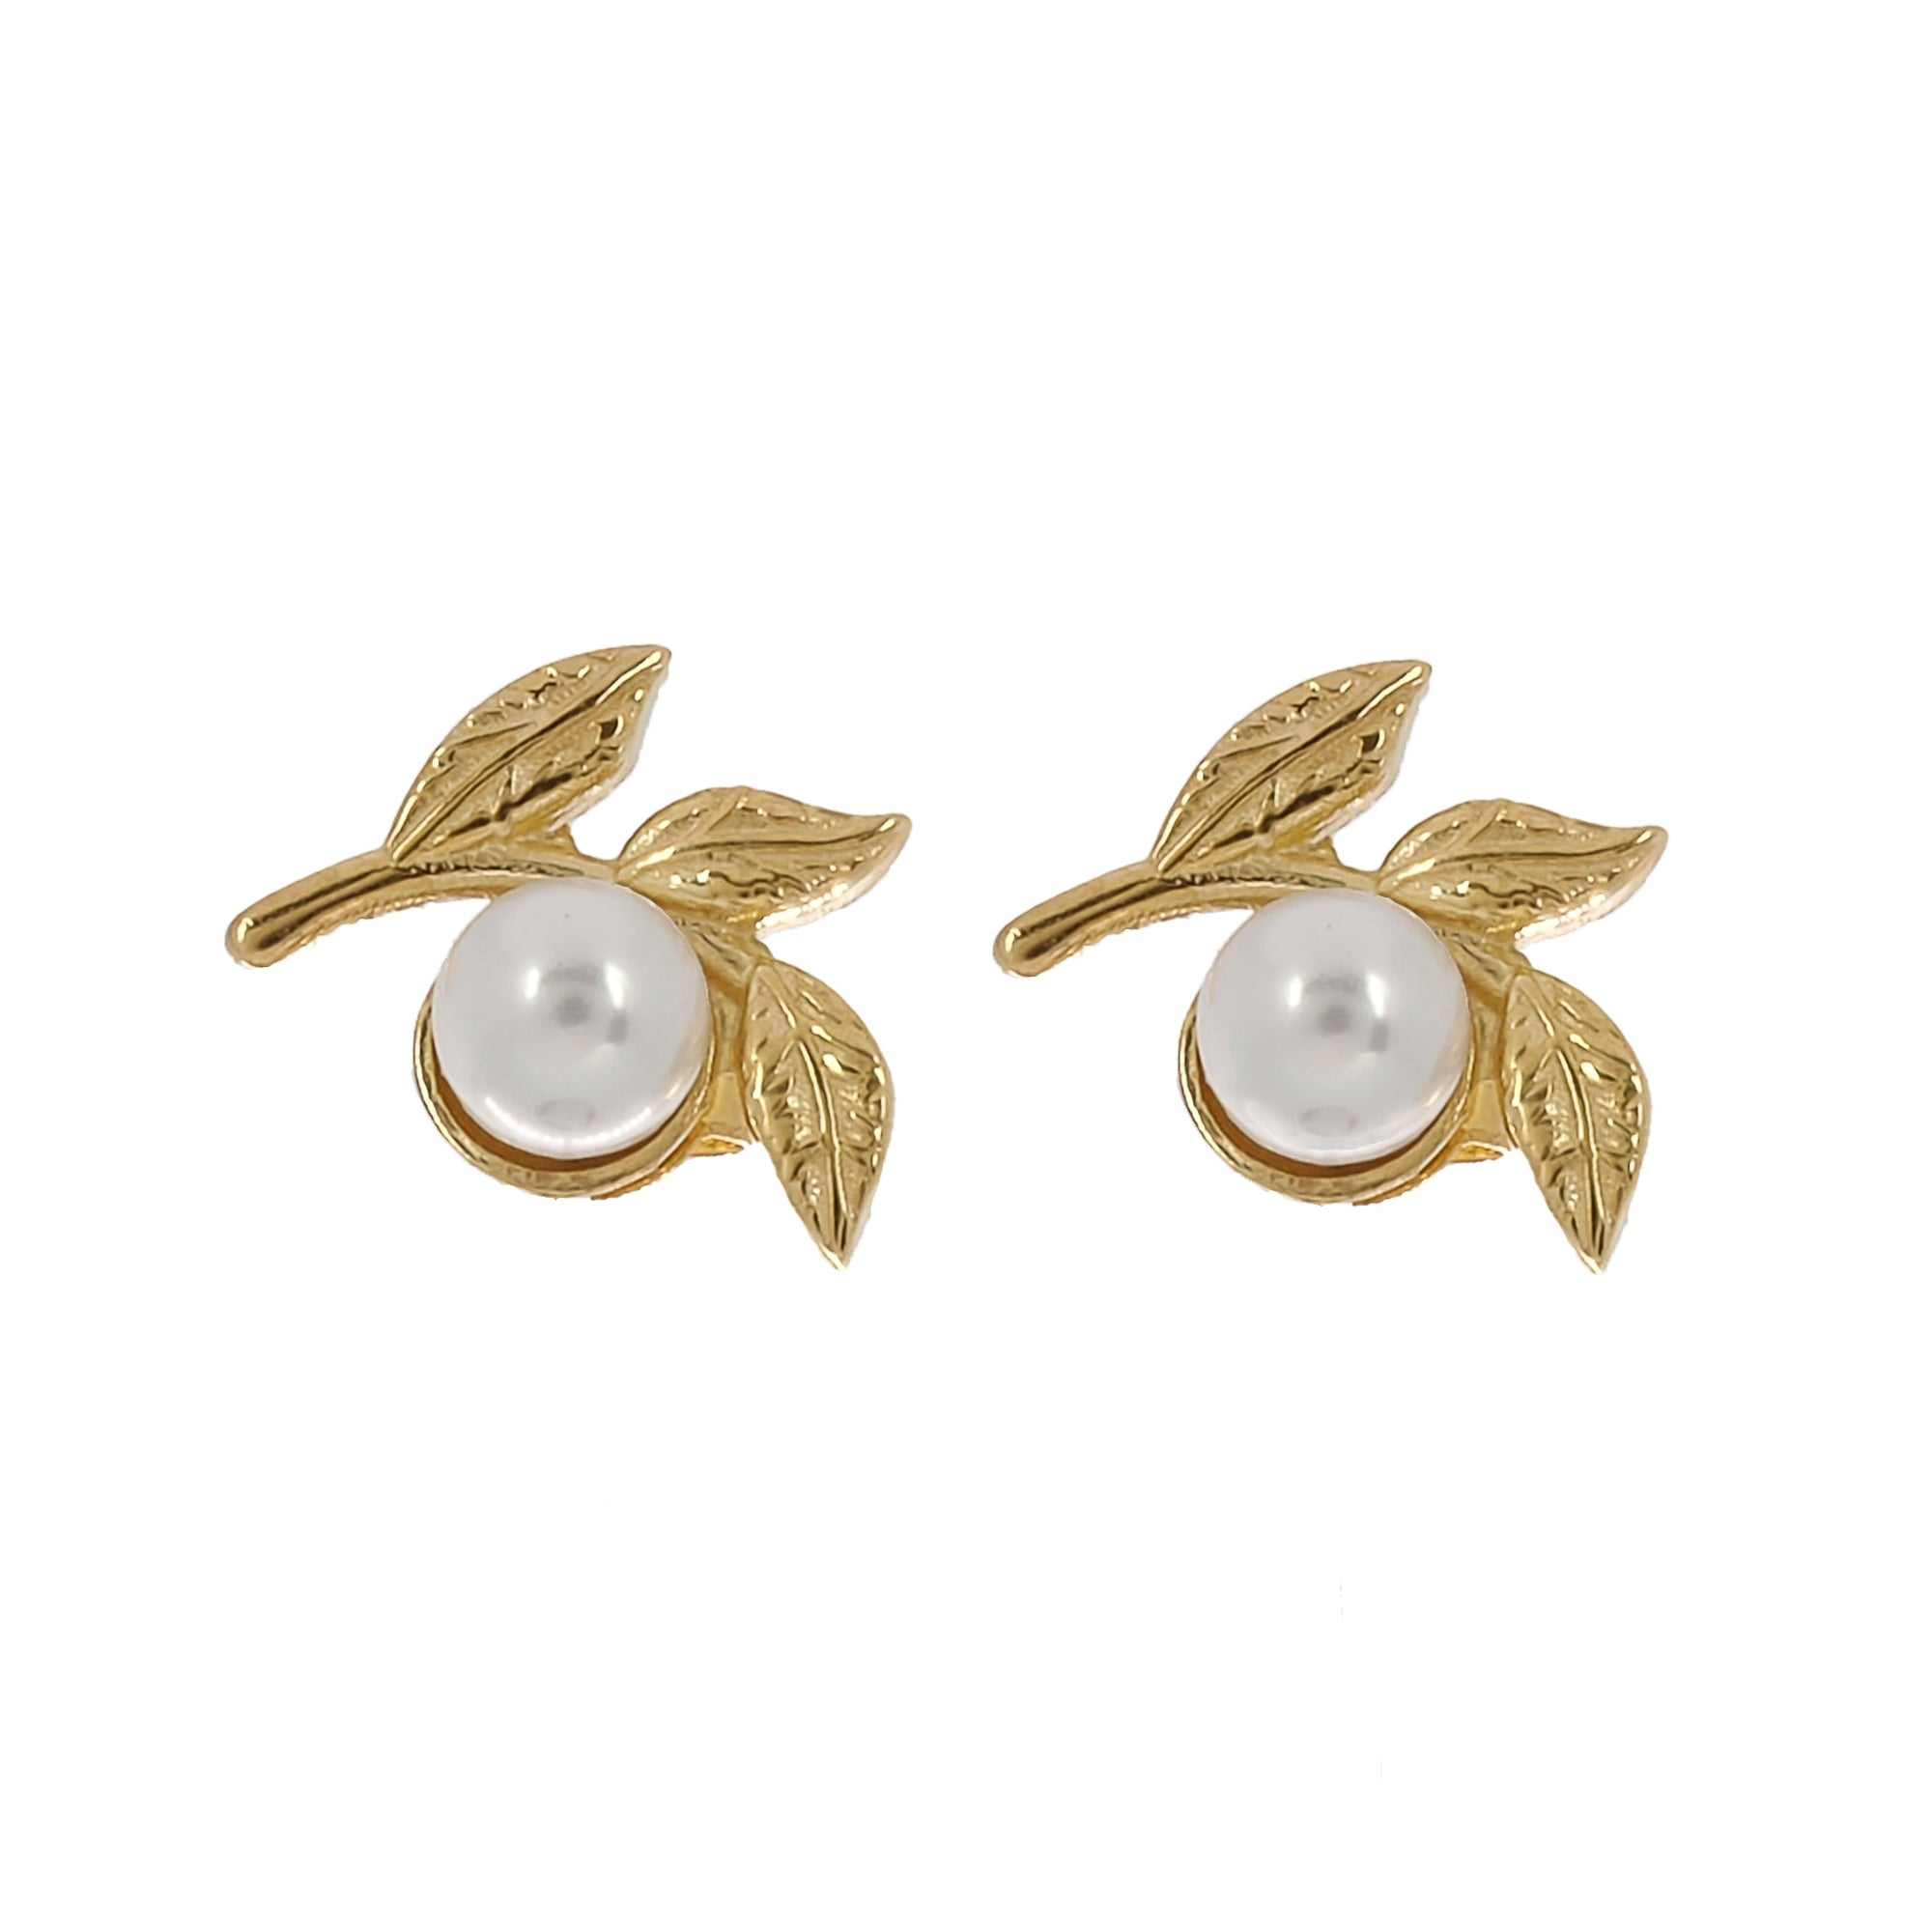 Cleopatra Pearl Floral Earrings: Sterling Silver, 18K Gold, Handcrafted USA.